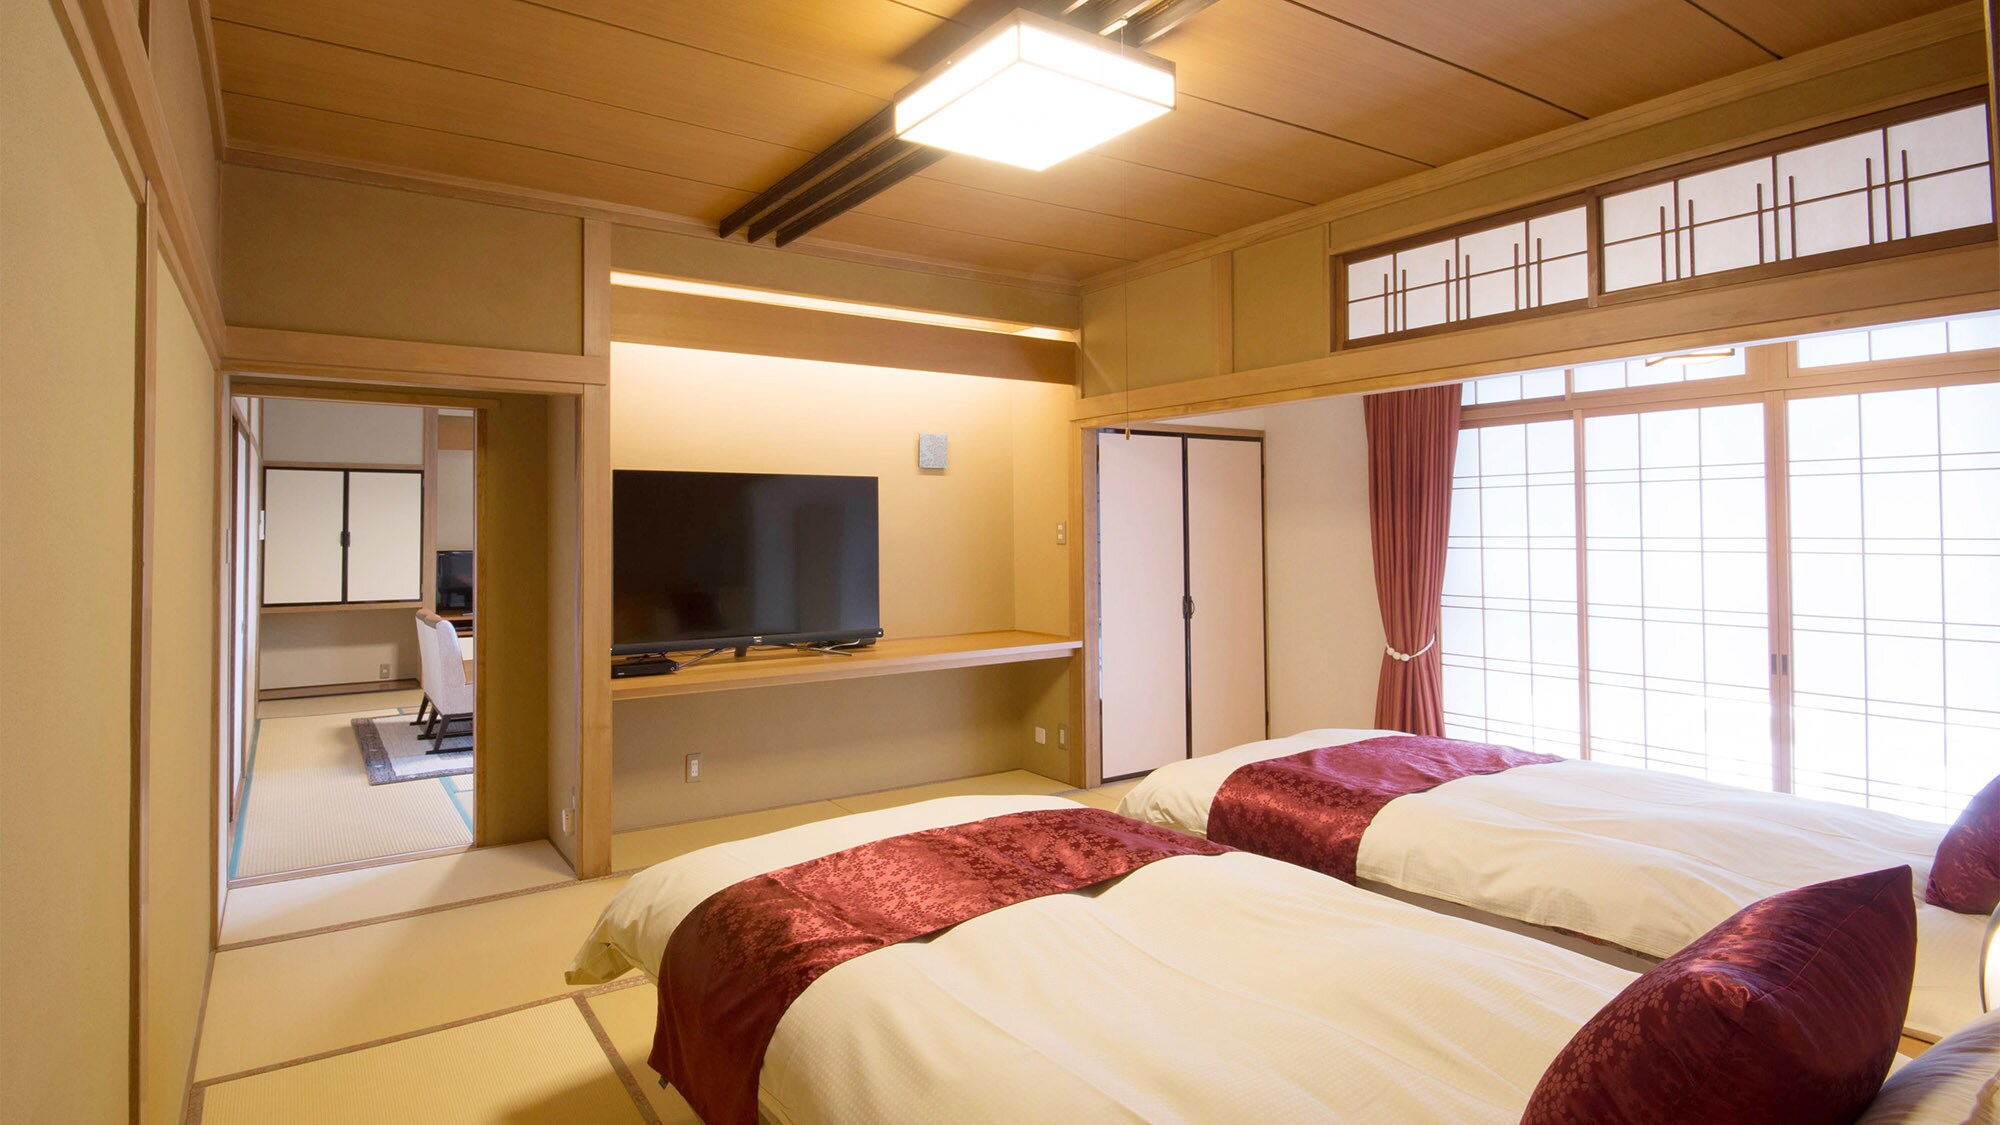 ・ There is a TV in each of the Japanese-style and Western-style rooms (special room Rindo)